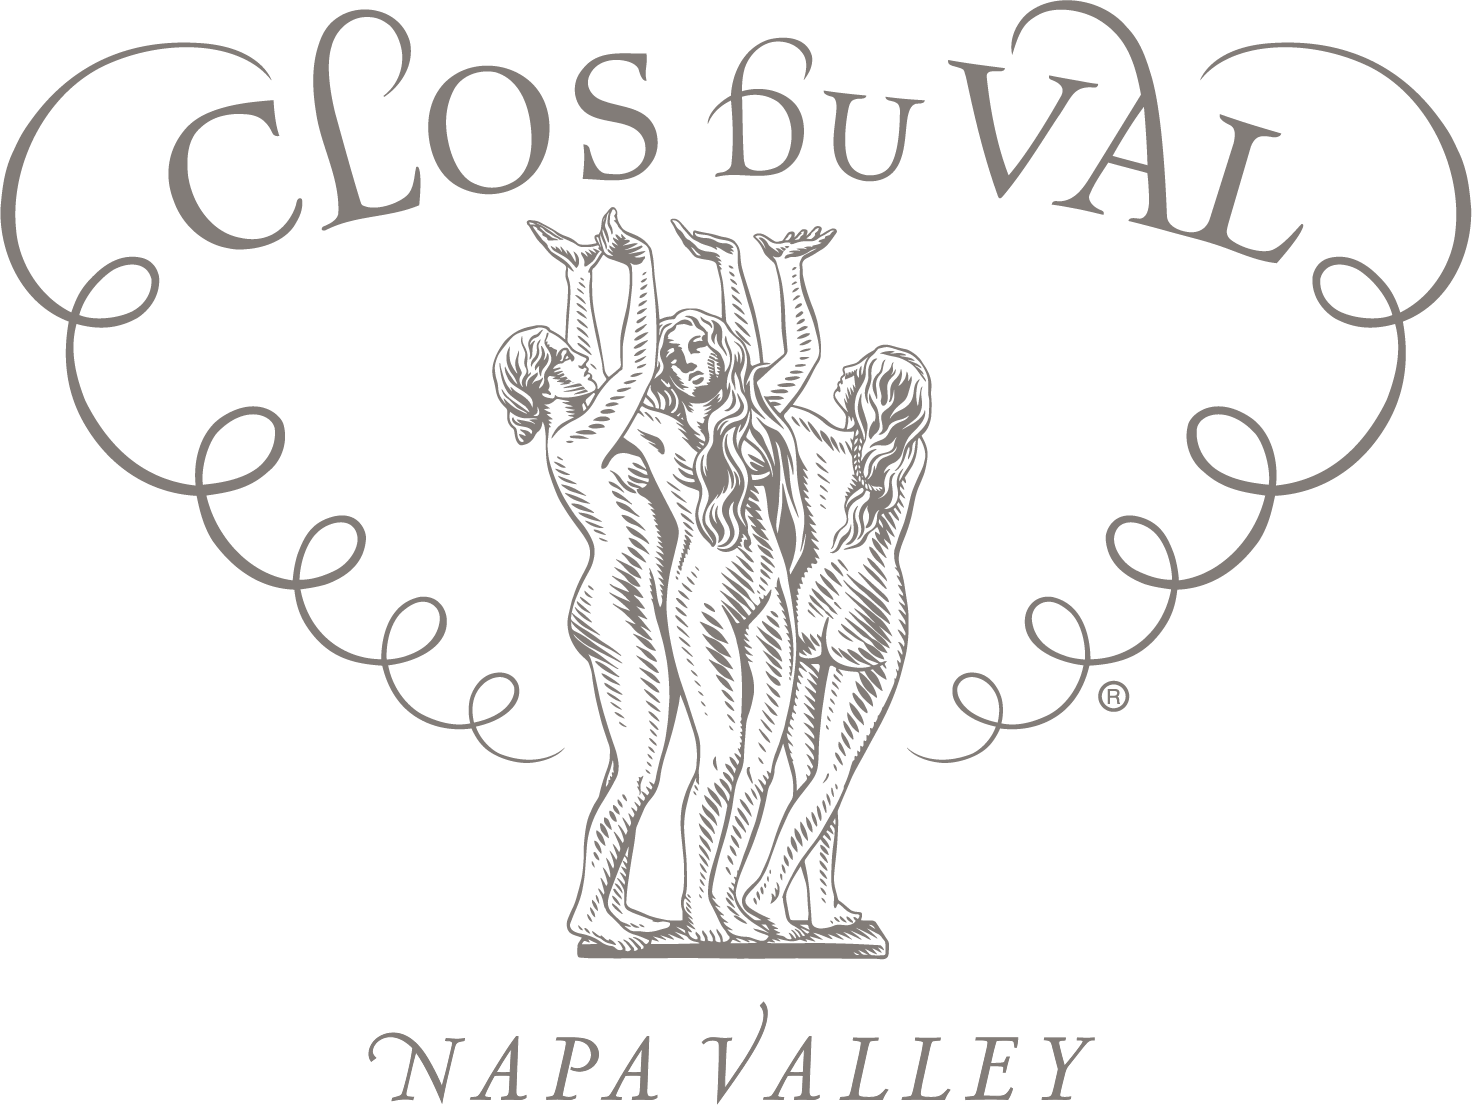 Clos du Val logo design by logo designer CF Napa Brand Design for your inspiration and for the worlds largest logo competition